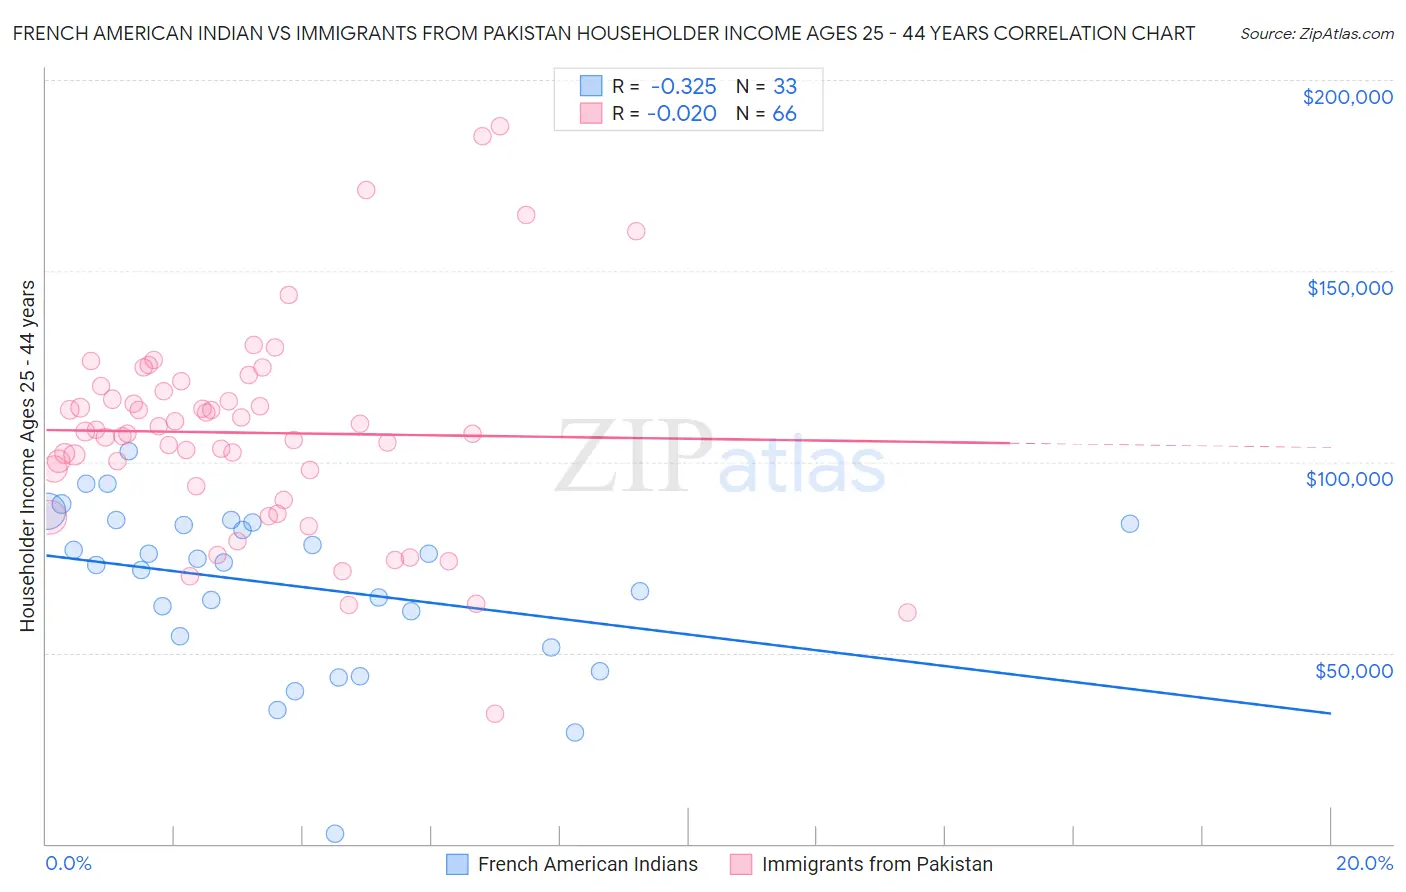 French American Indian vs Immigrants from Pakistan Householder Income Ages 25 - 44 years